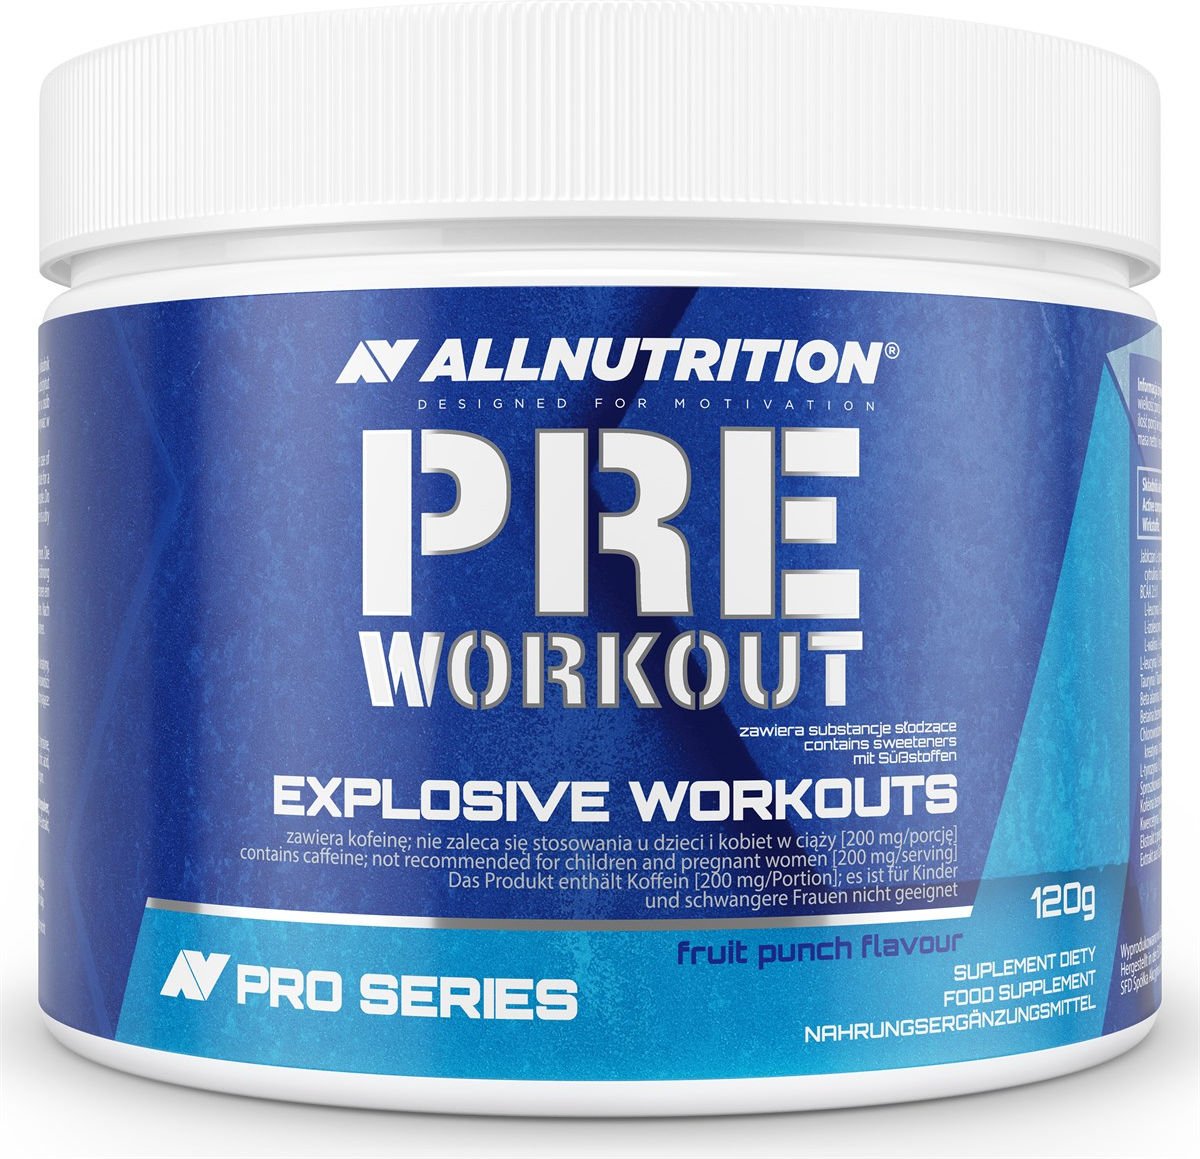 ALL NUTRITION PRE WORKOUT -120 G -Fruit Punch Flavour